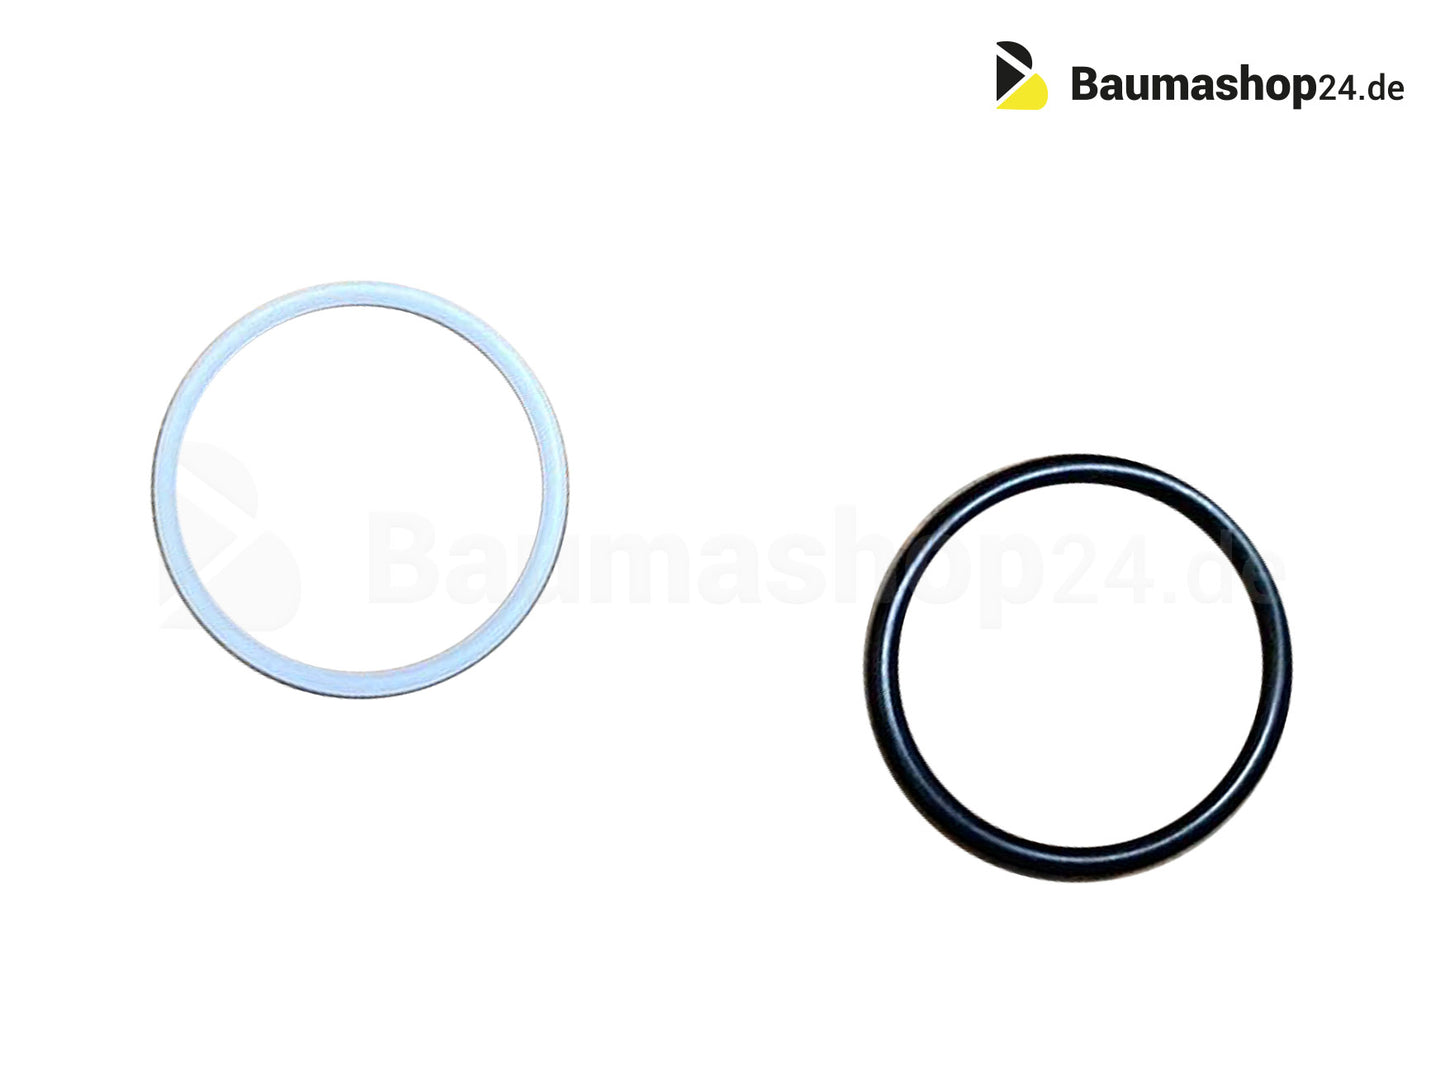 7020132 OilQuick O support ring 1" for OQ70-OQ80